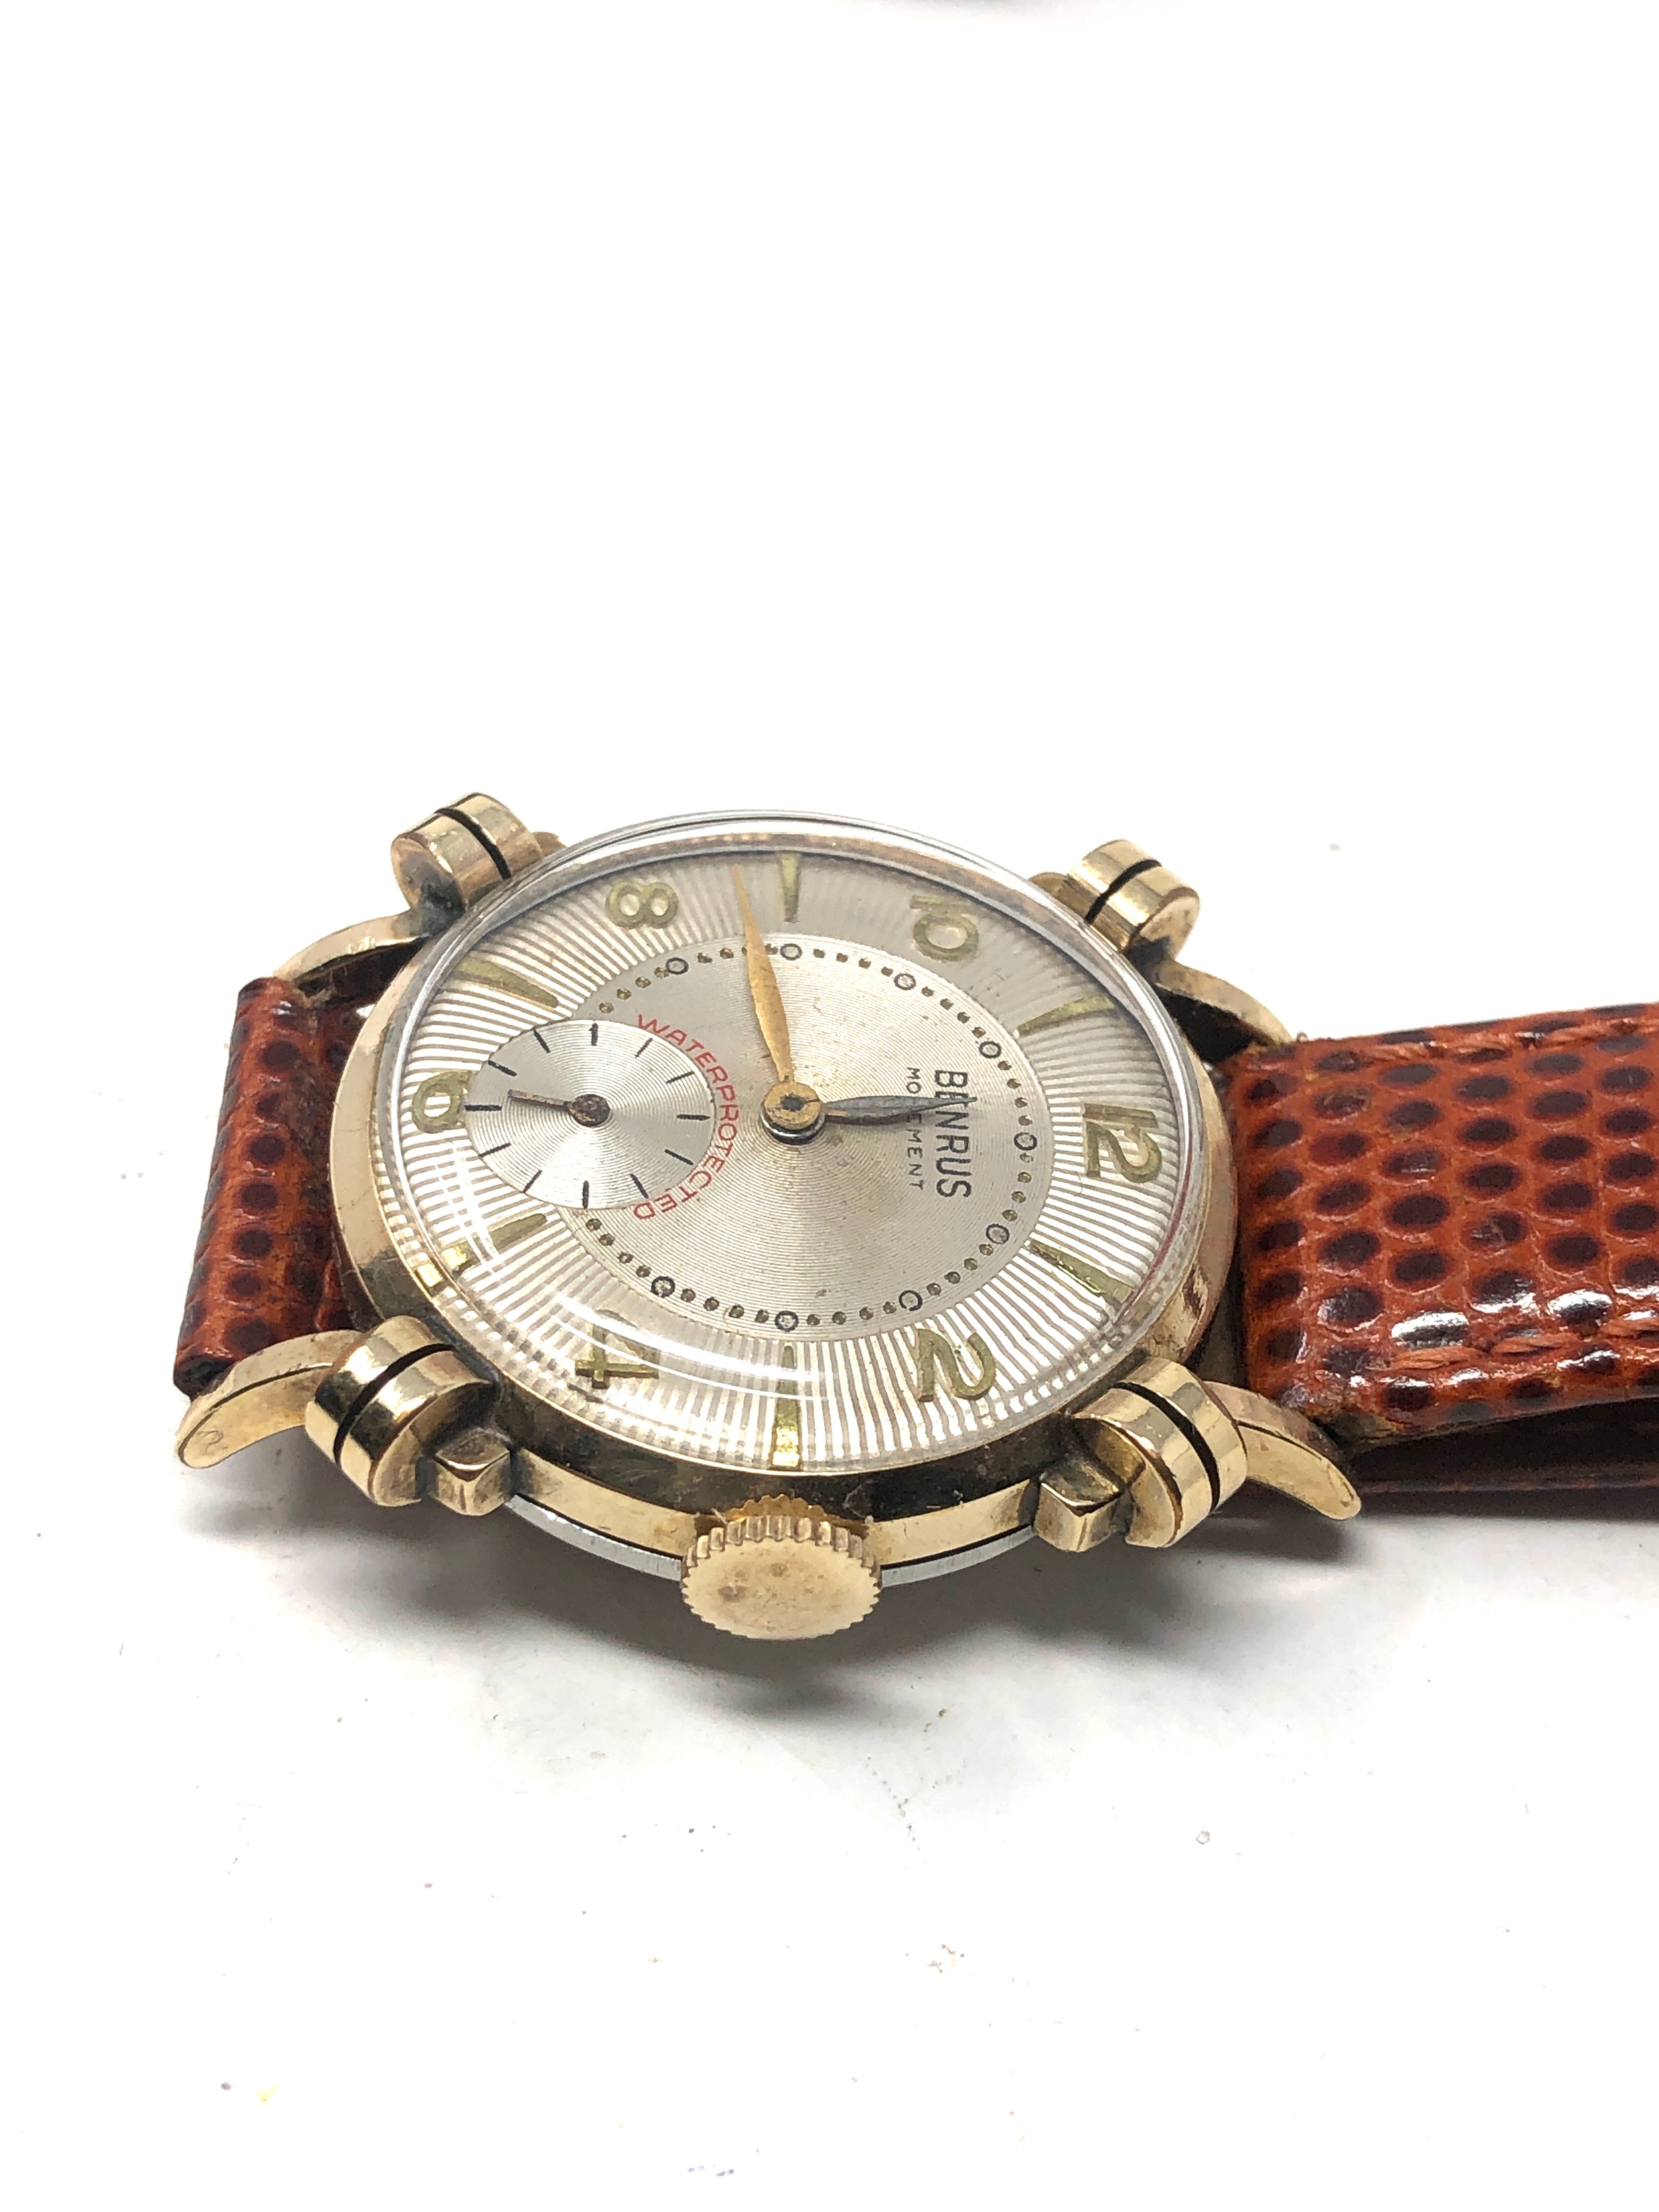 Vintage Benrus gents wristwatch the watch is ticking - Image 3 of 4